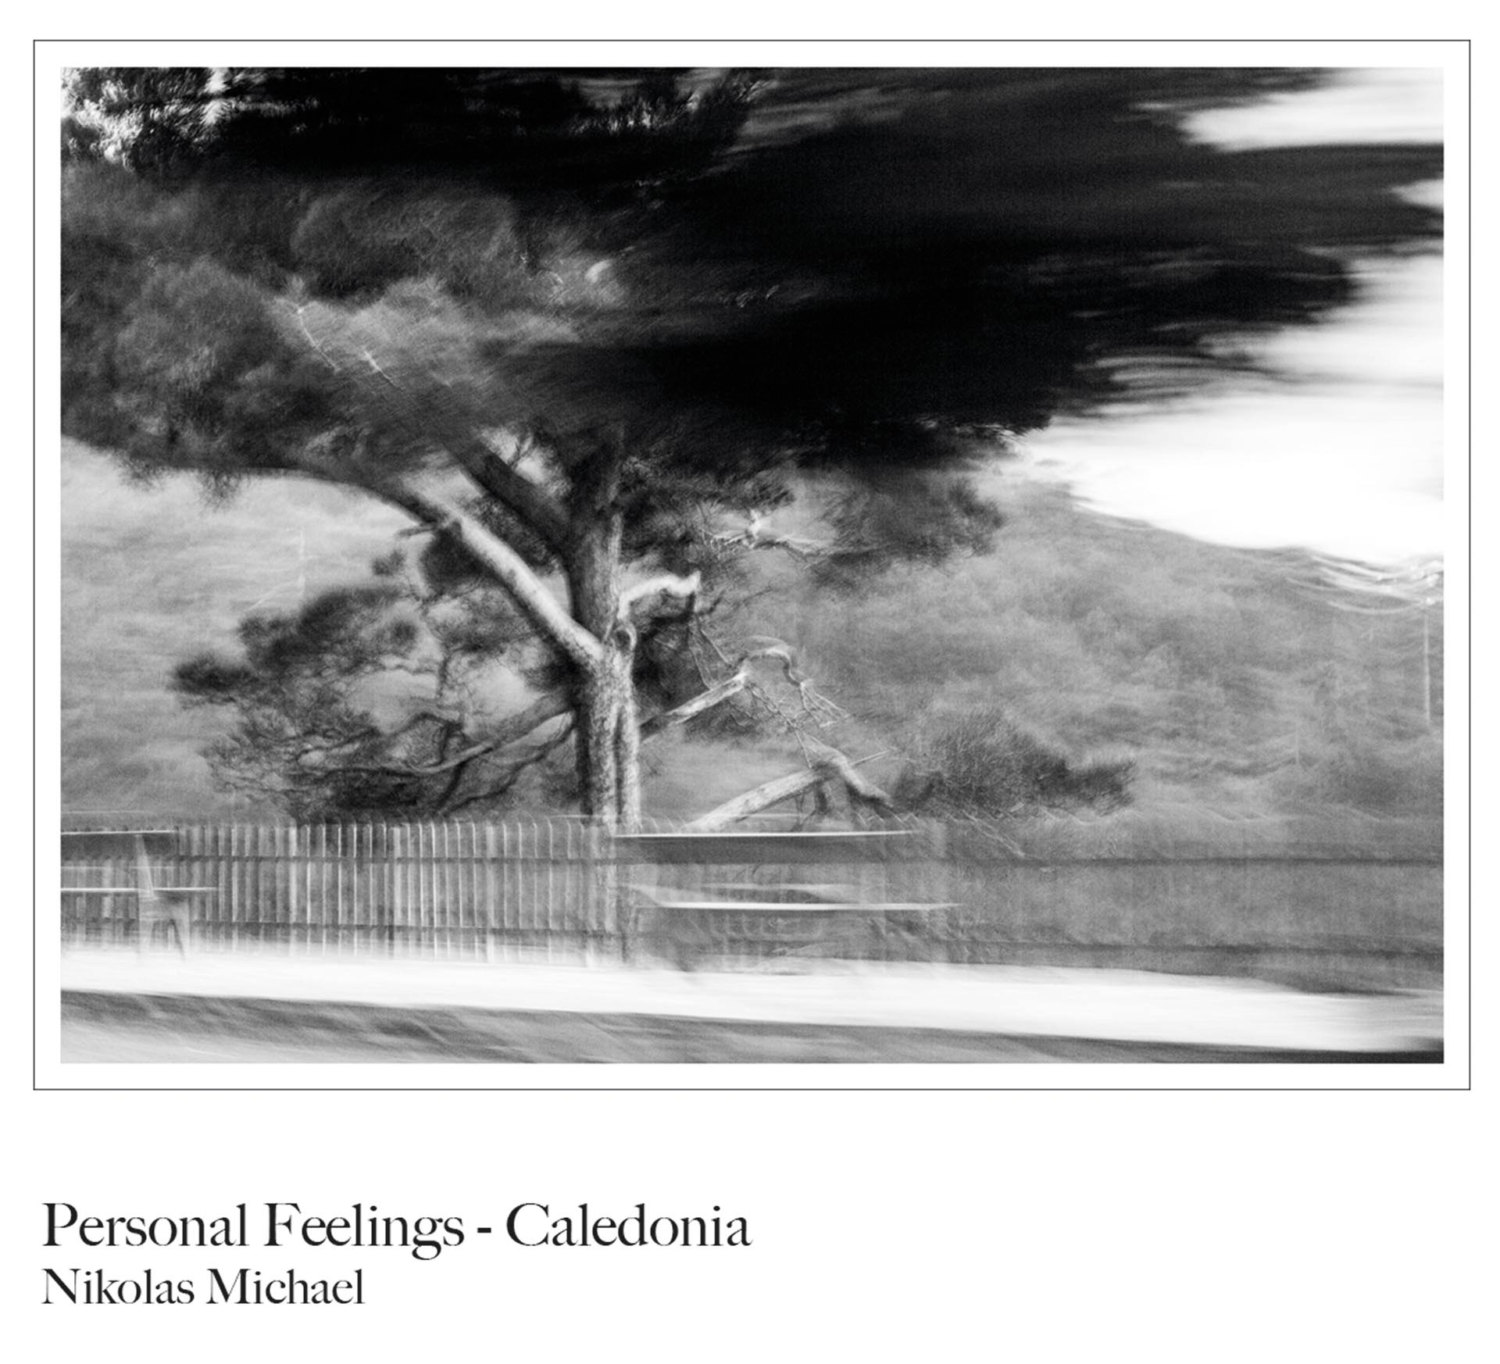 Personal Feelings - Caledonia by Nikolas Michael (Troodos, Cyprus, black and white photography, fine art, b&w, tree, nature, landscape)